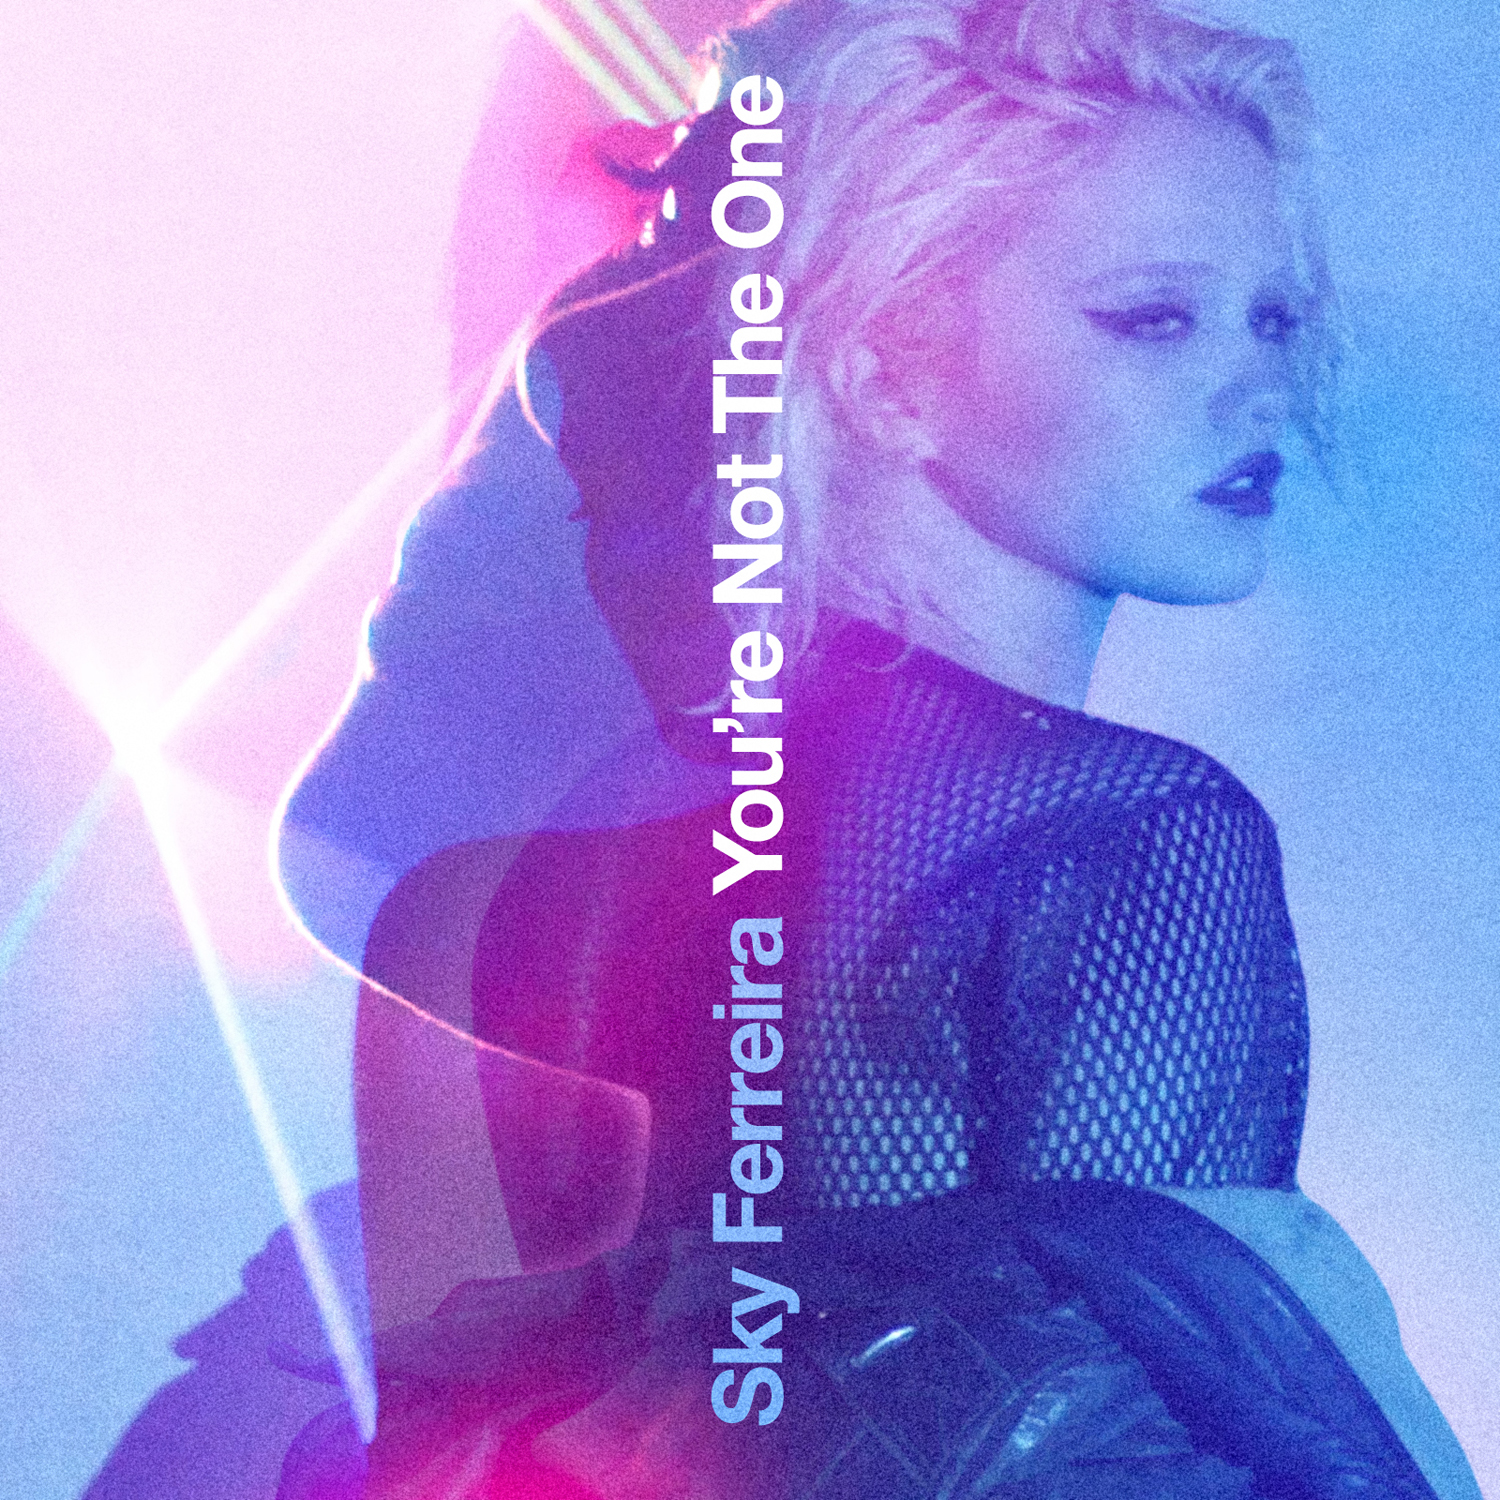 Sky-ferreira-Youre-not-the-one.jpg?forma